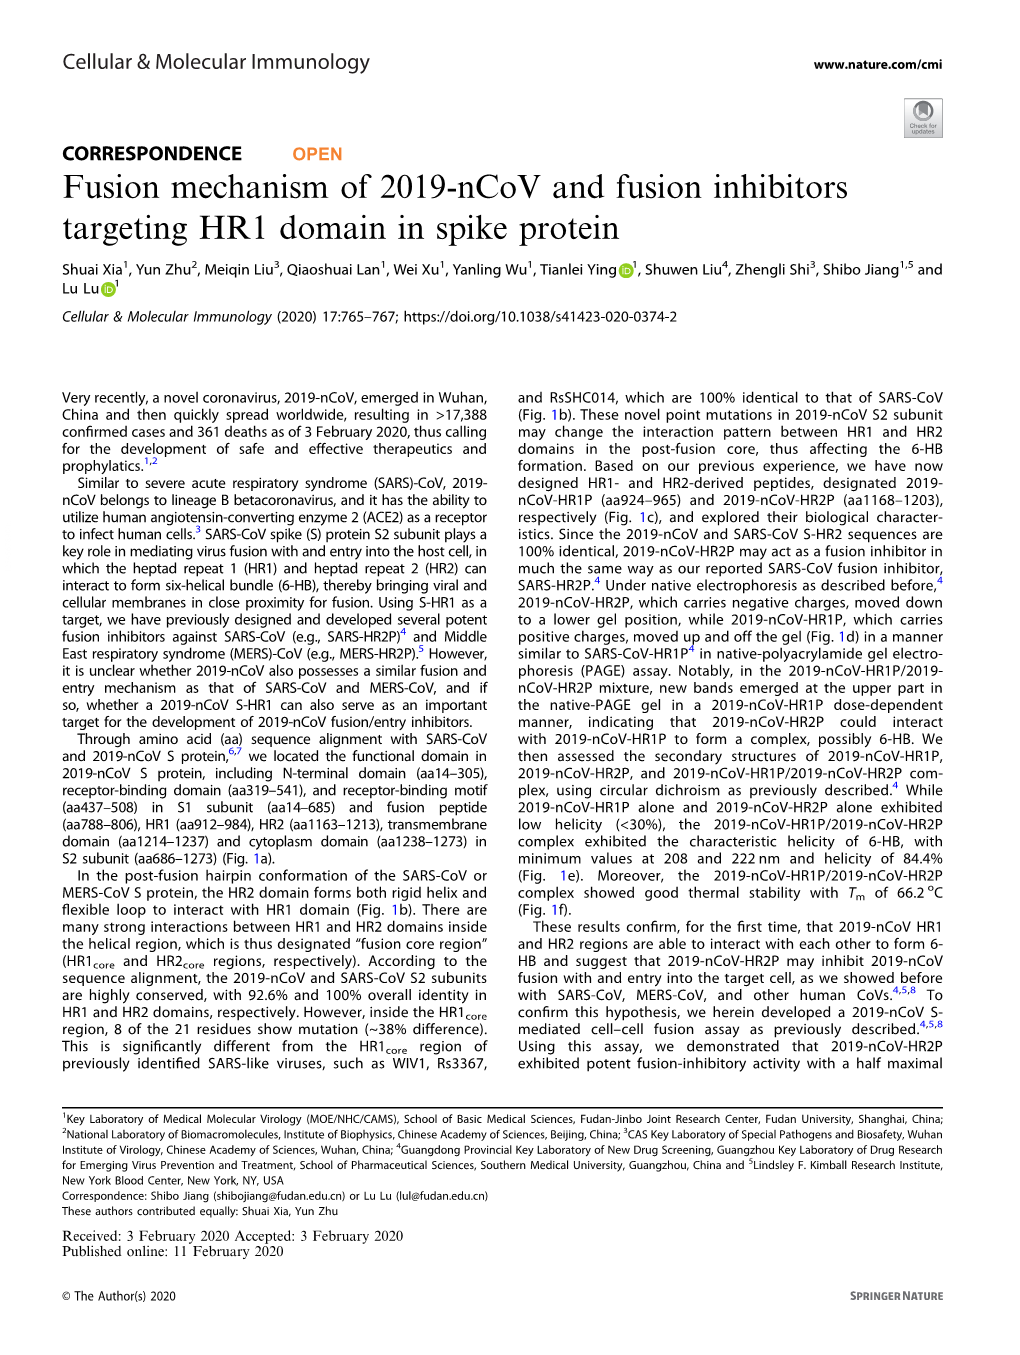 Fusion Mechanism of 2019-Ncov and Fusion Inhibitors Targeting HR1 Domain in Spike Protein